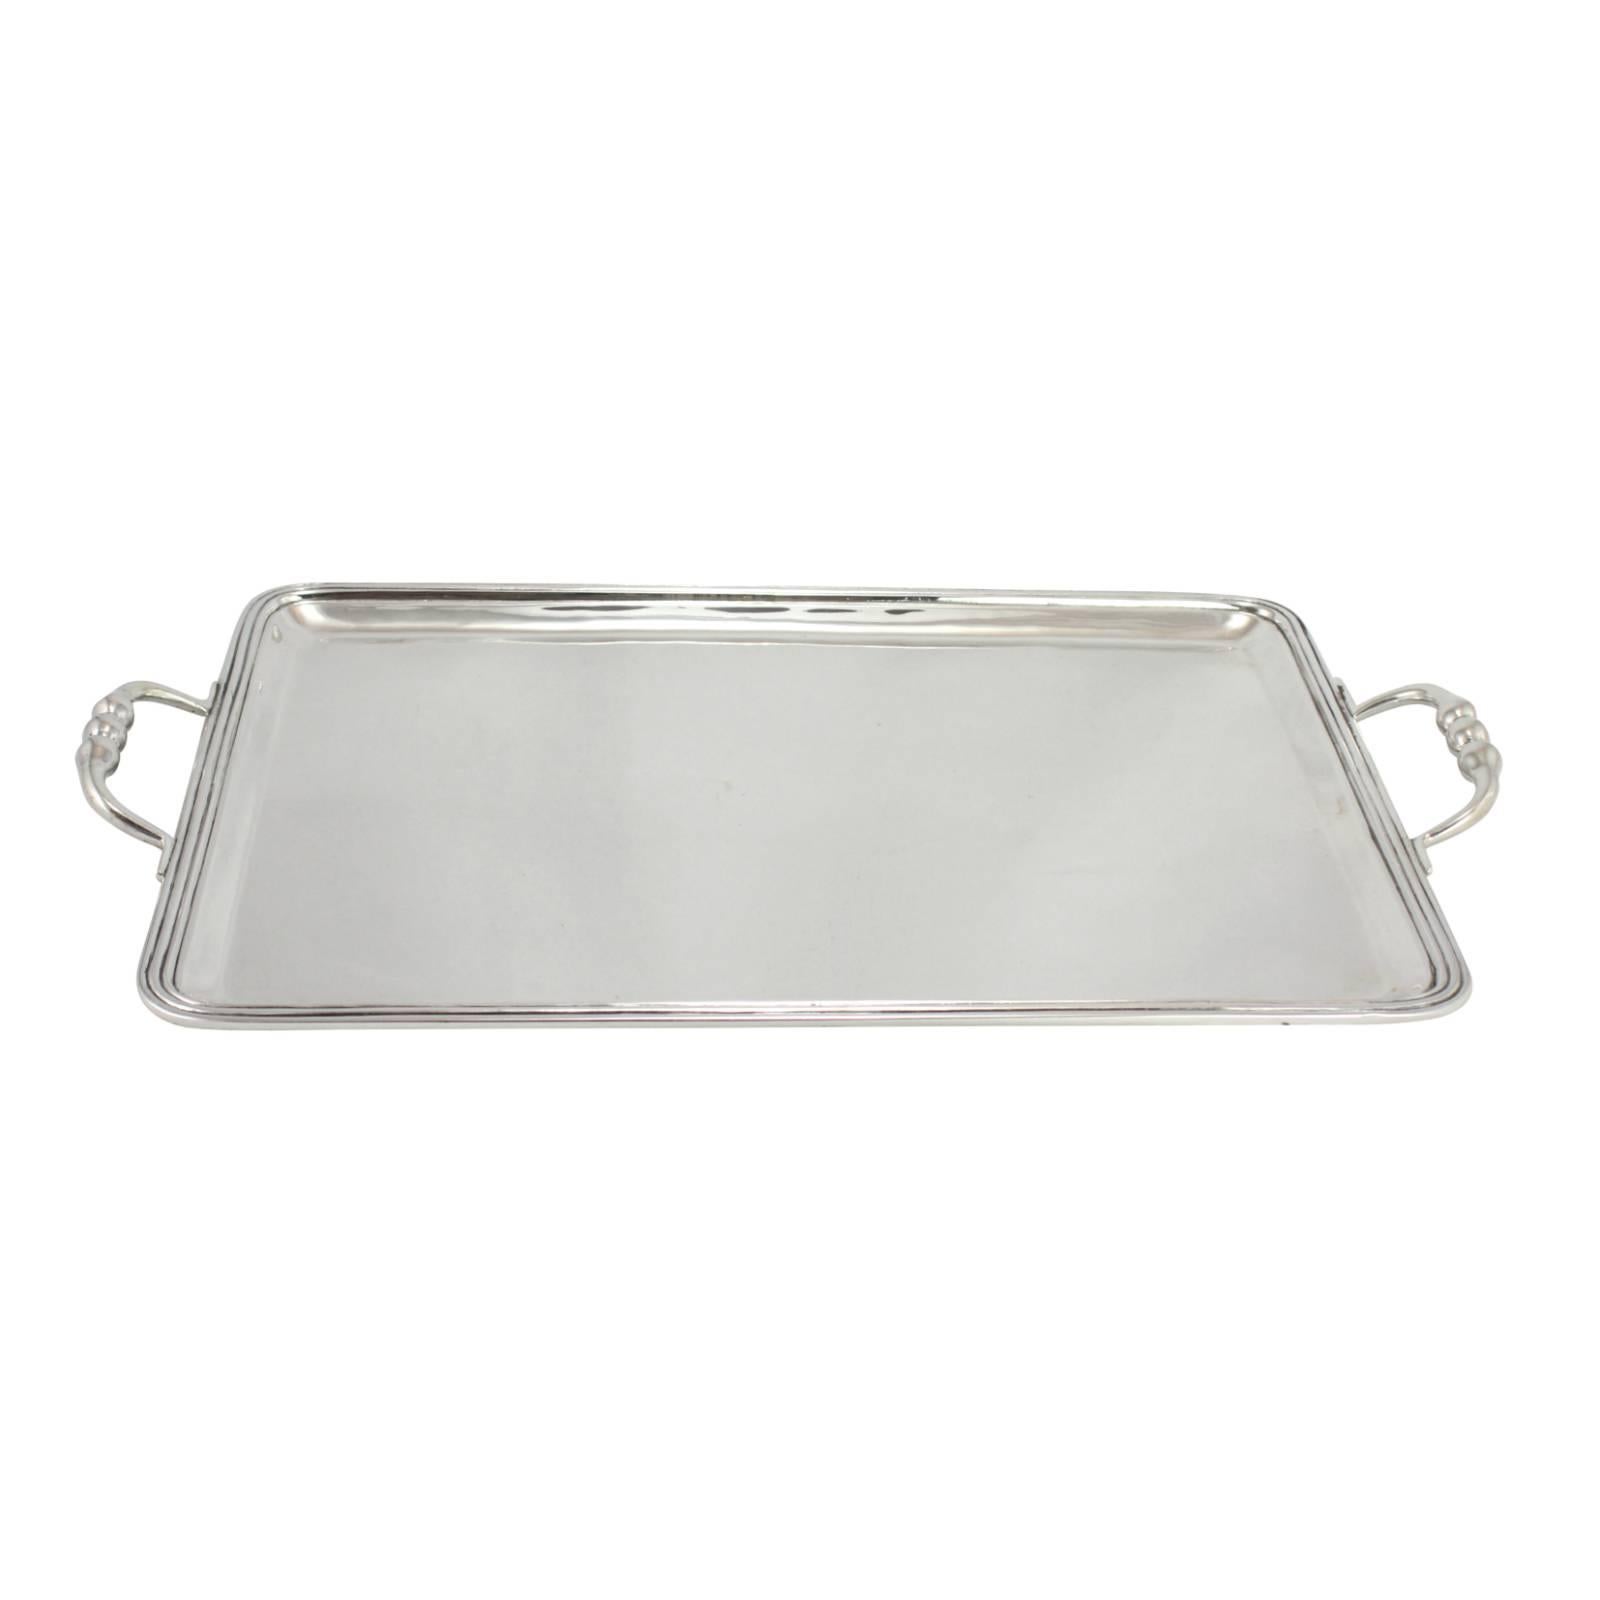 This piece is a midcentury, sterling silver serving tray by Sanborns, Mexico. 

When Frank Sanborn found a lack of quality silversmithing in Mexico in the 1920s, despite Mexico leading the world in silver production, he set out to bring a new